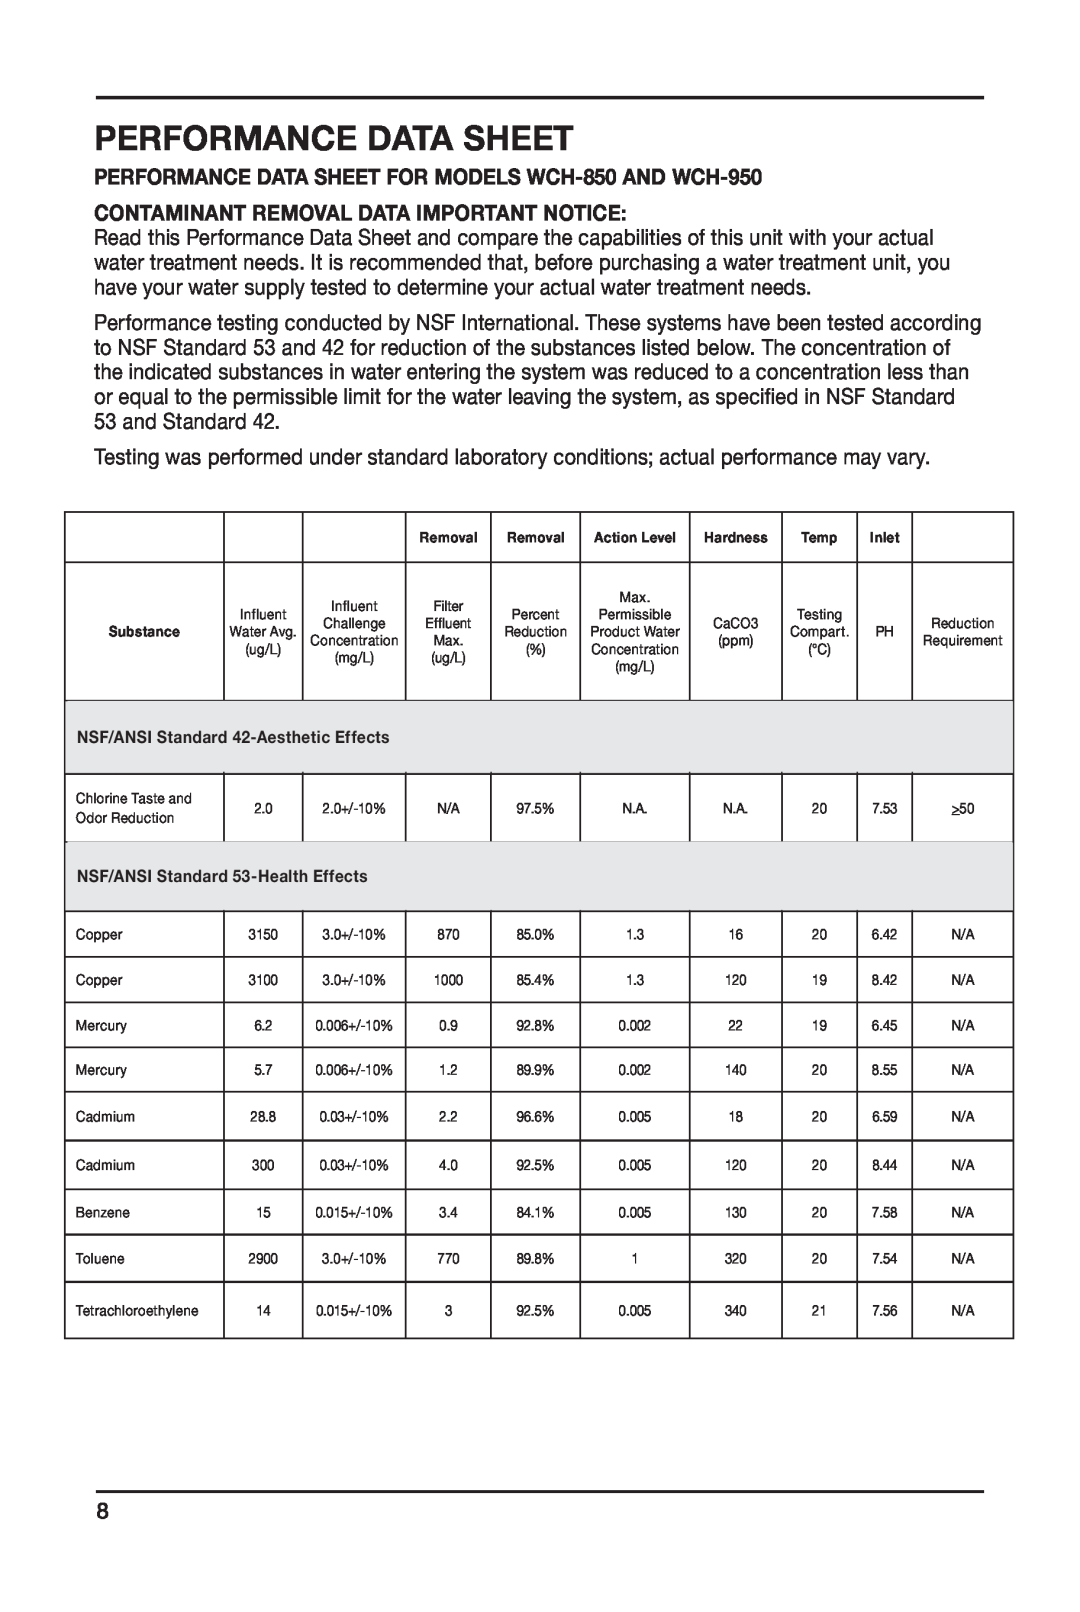 Cuisinart WCH-950 manual Performance Data Sheet, Contaminant Removal Data Important Notice 